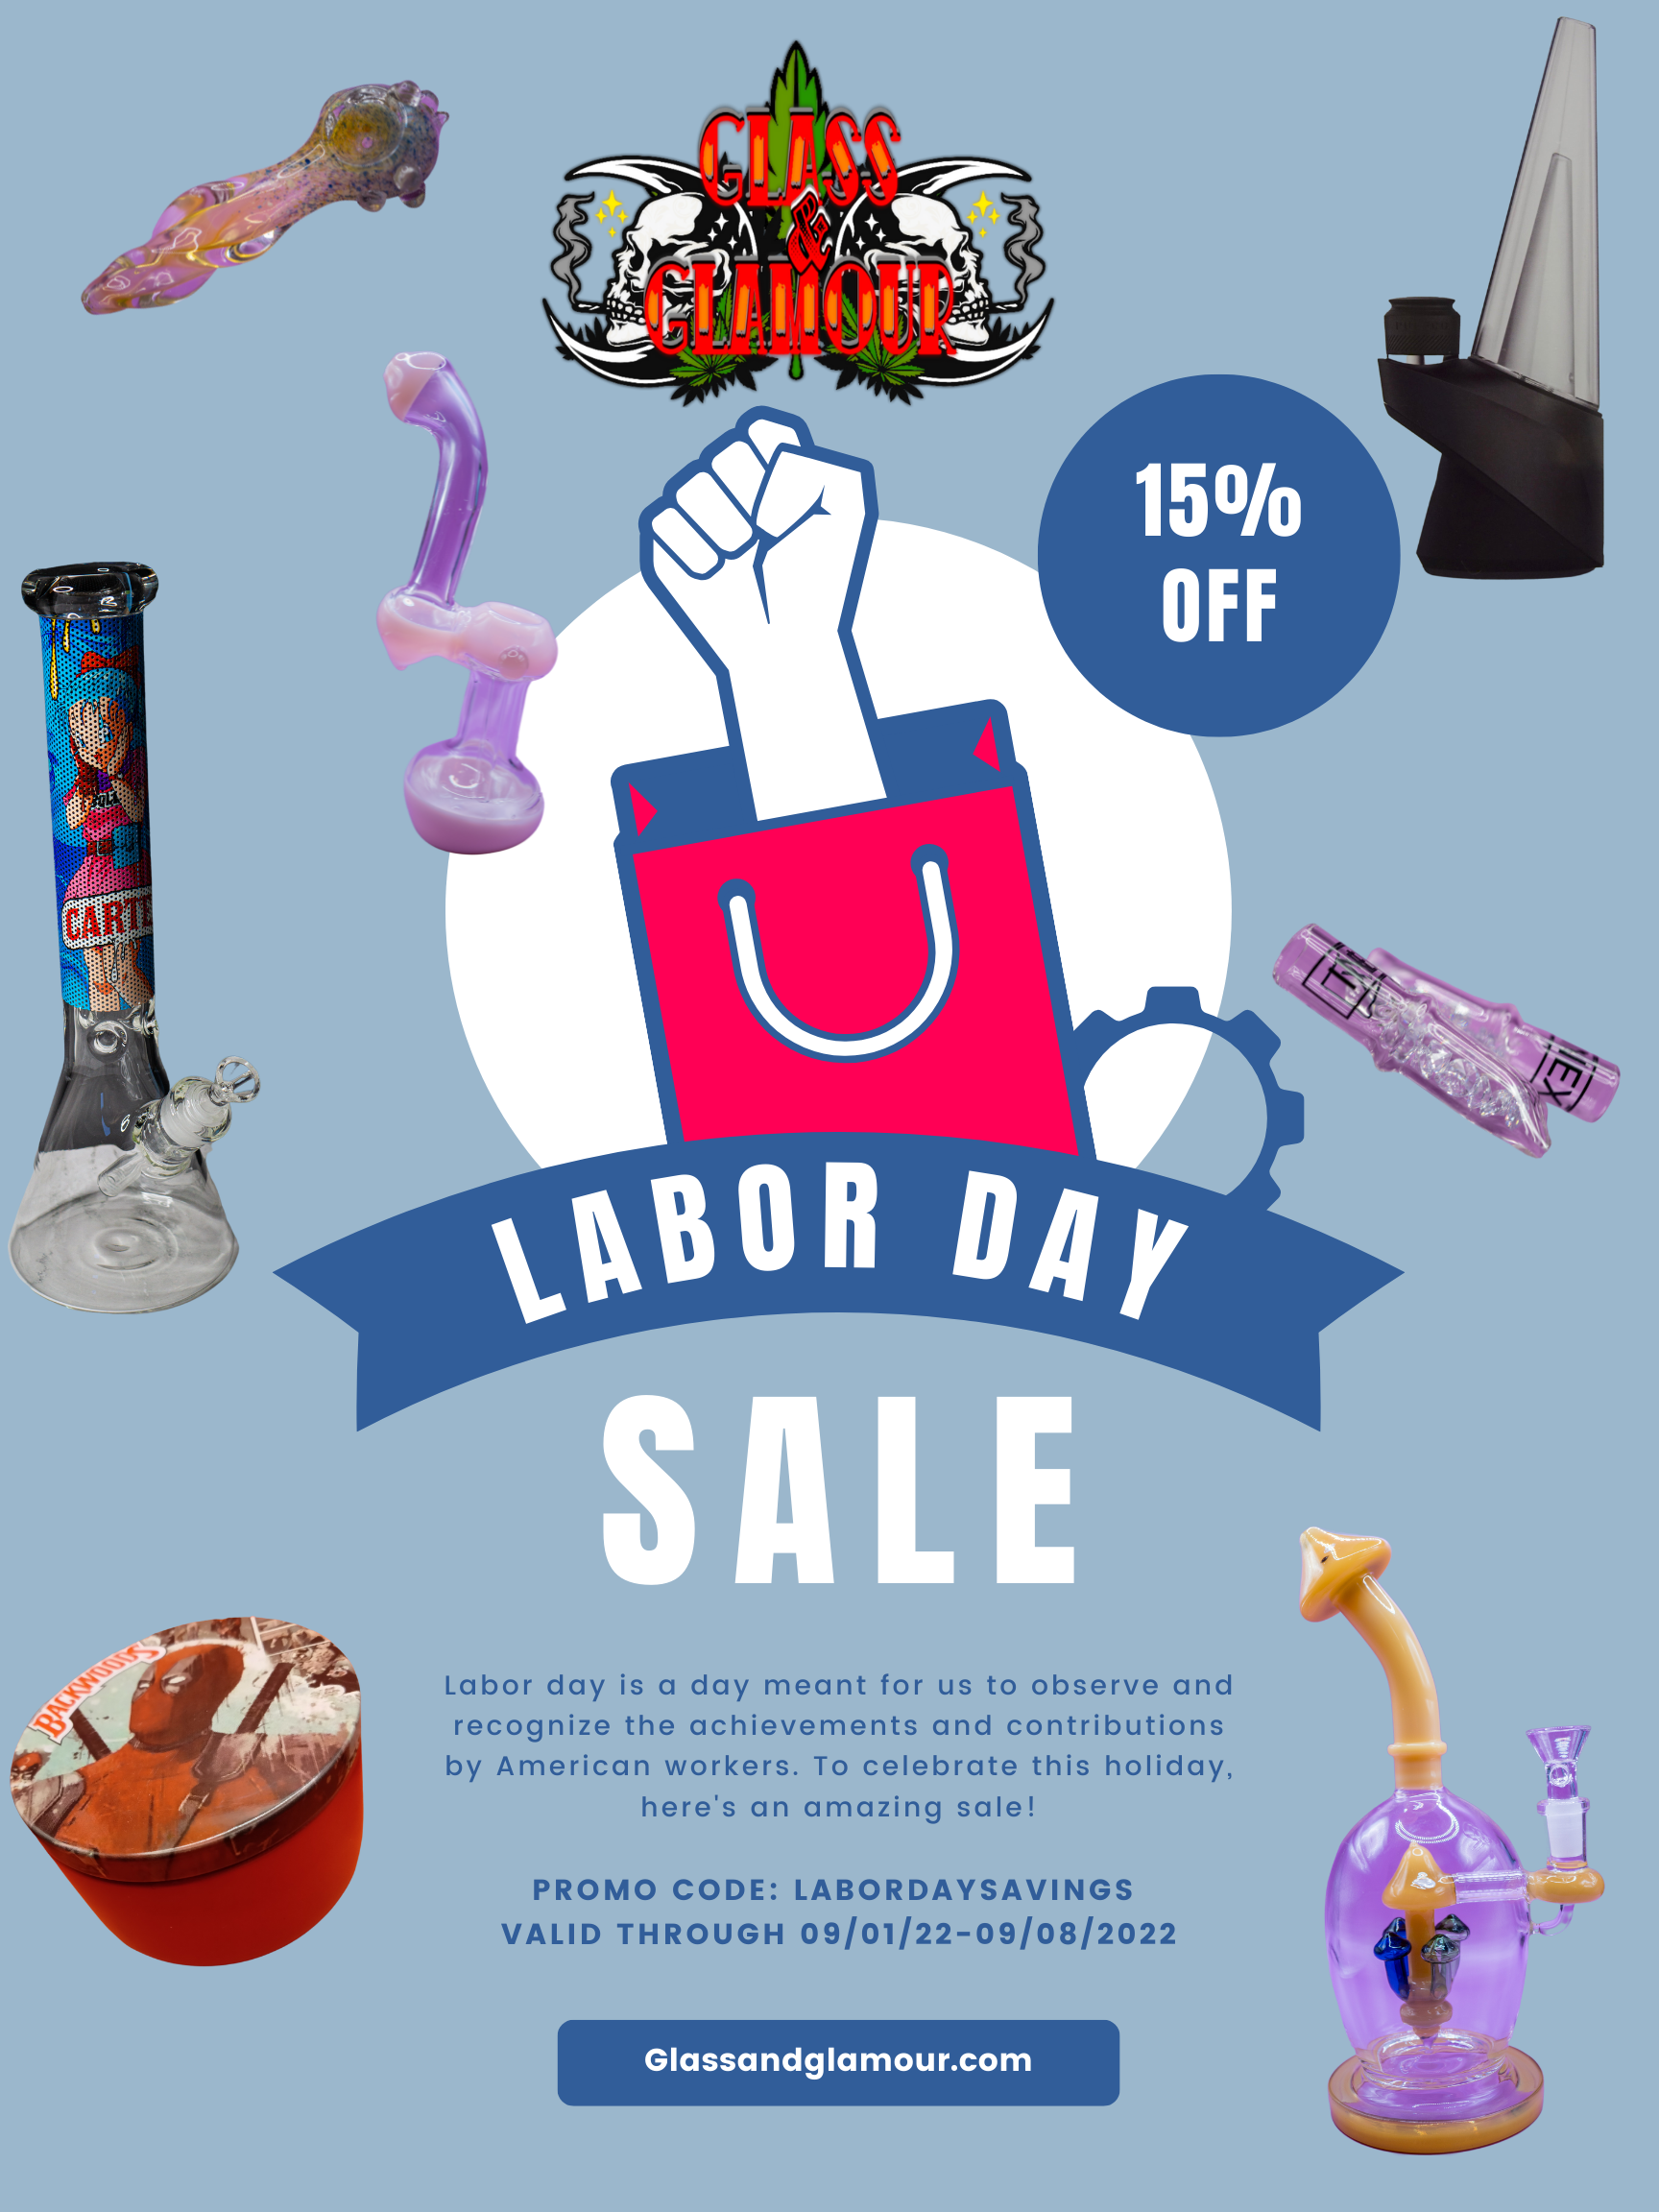 Labor day is a day meant for us to observe and recognize the achievements and contributions by American workers. To celebrate this holiday, here's an amazing sale! promo Code: labordaysavings  Valid through 09/01/22-09/08/2022